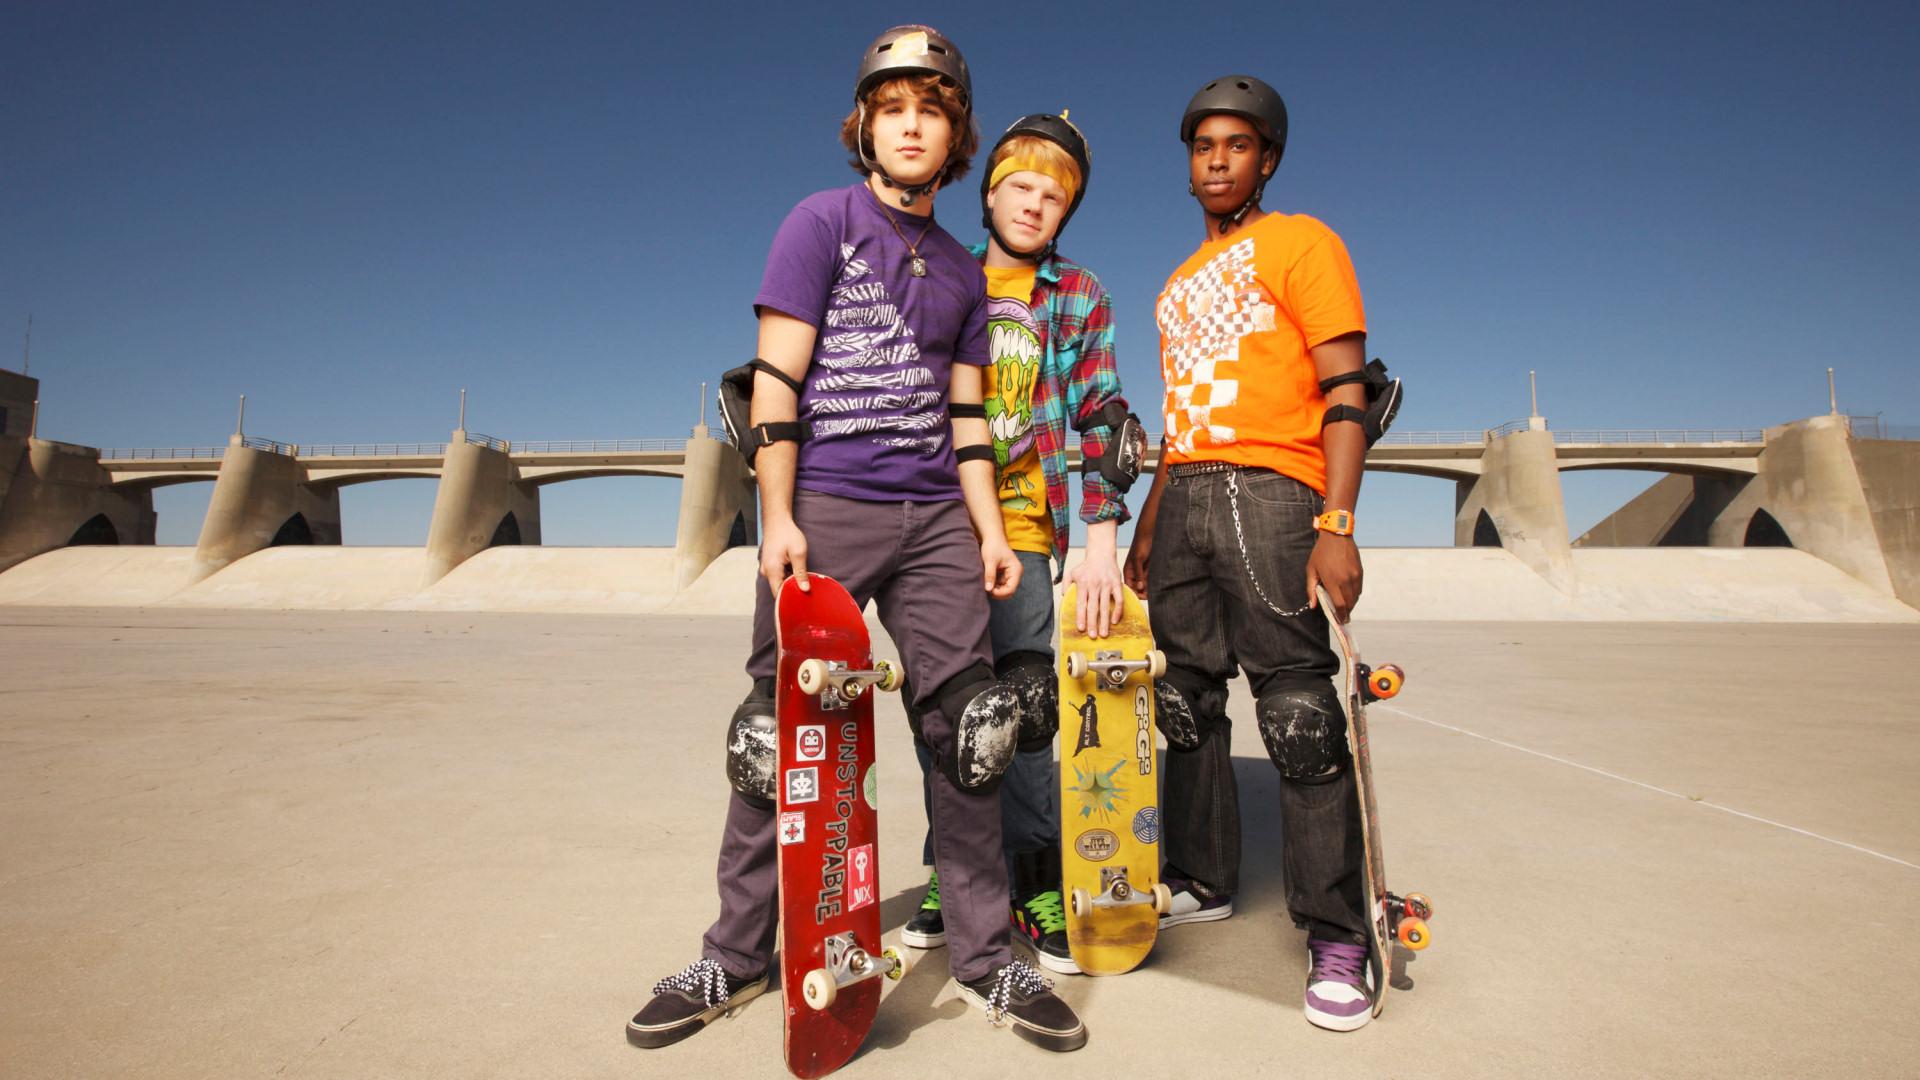 Zeke e Luther